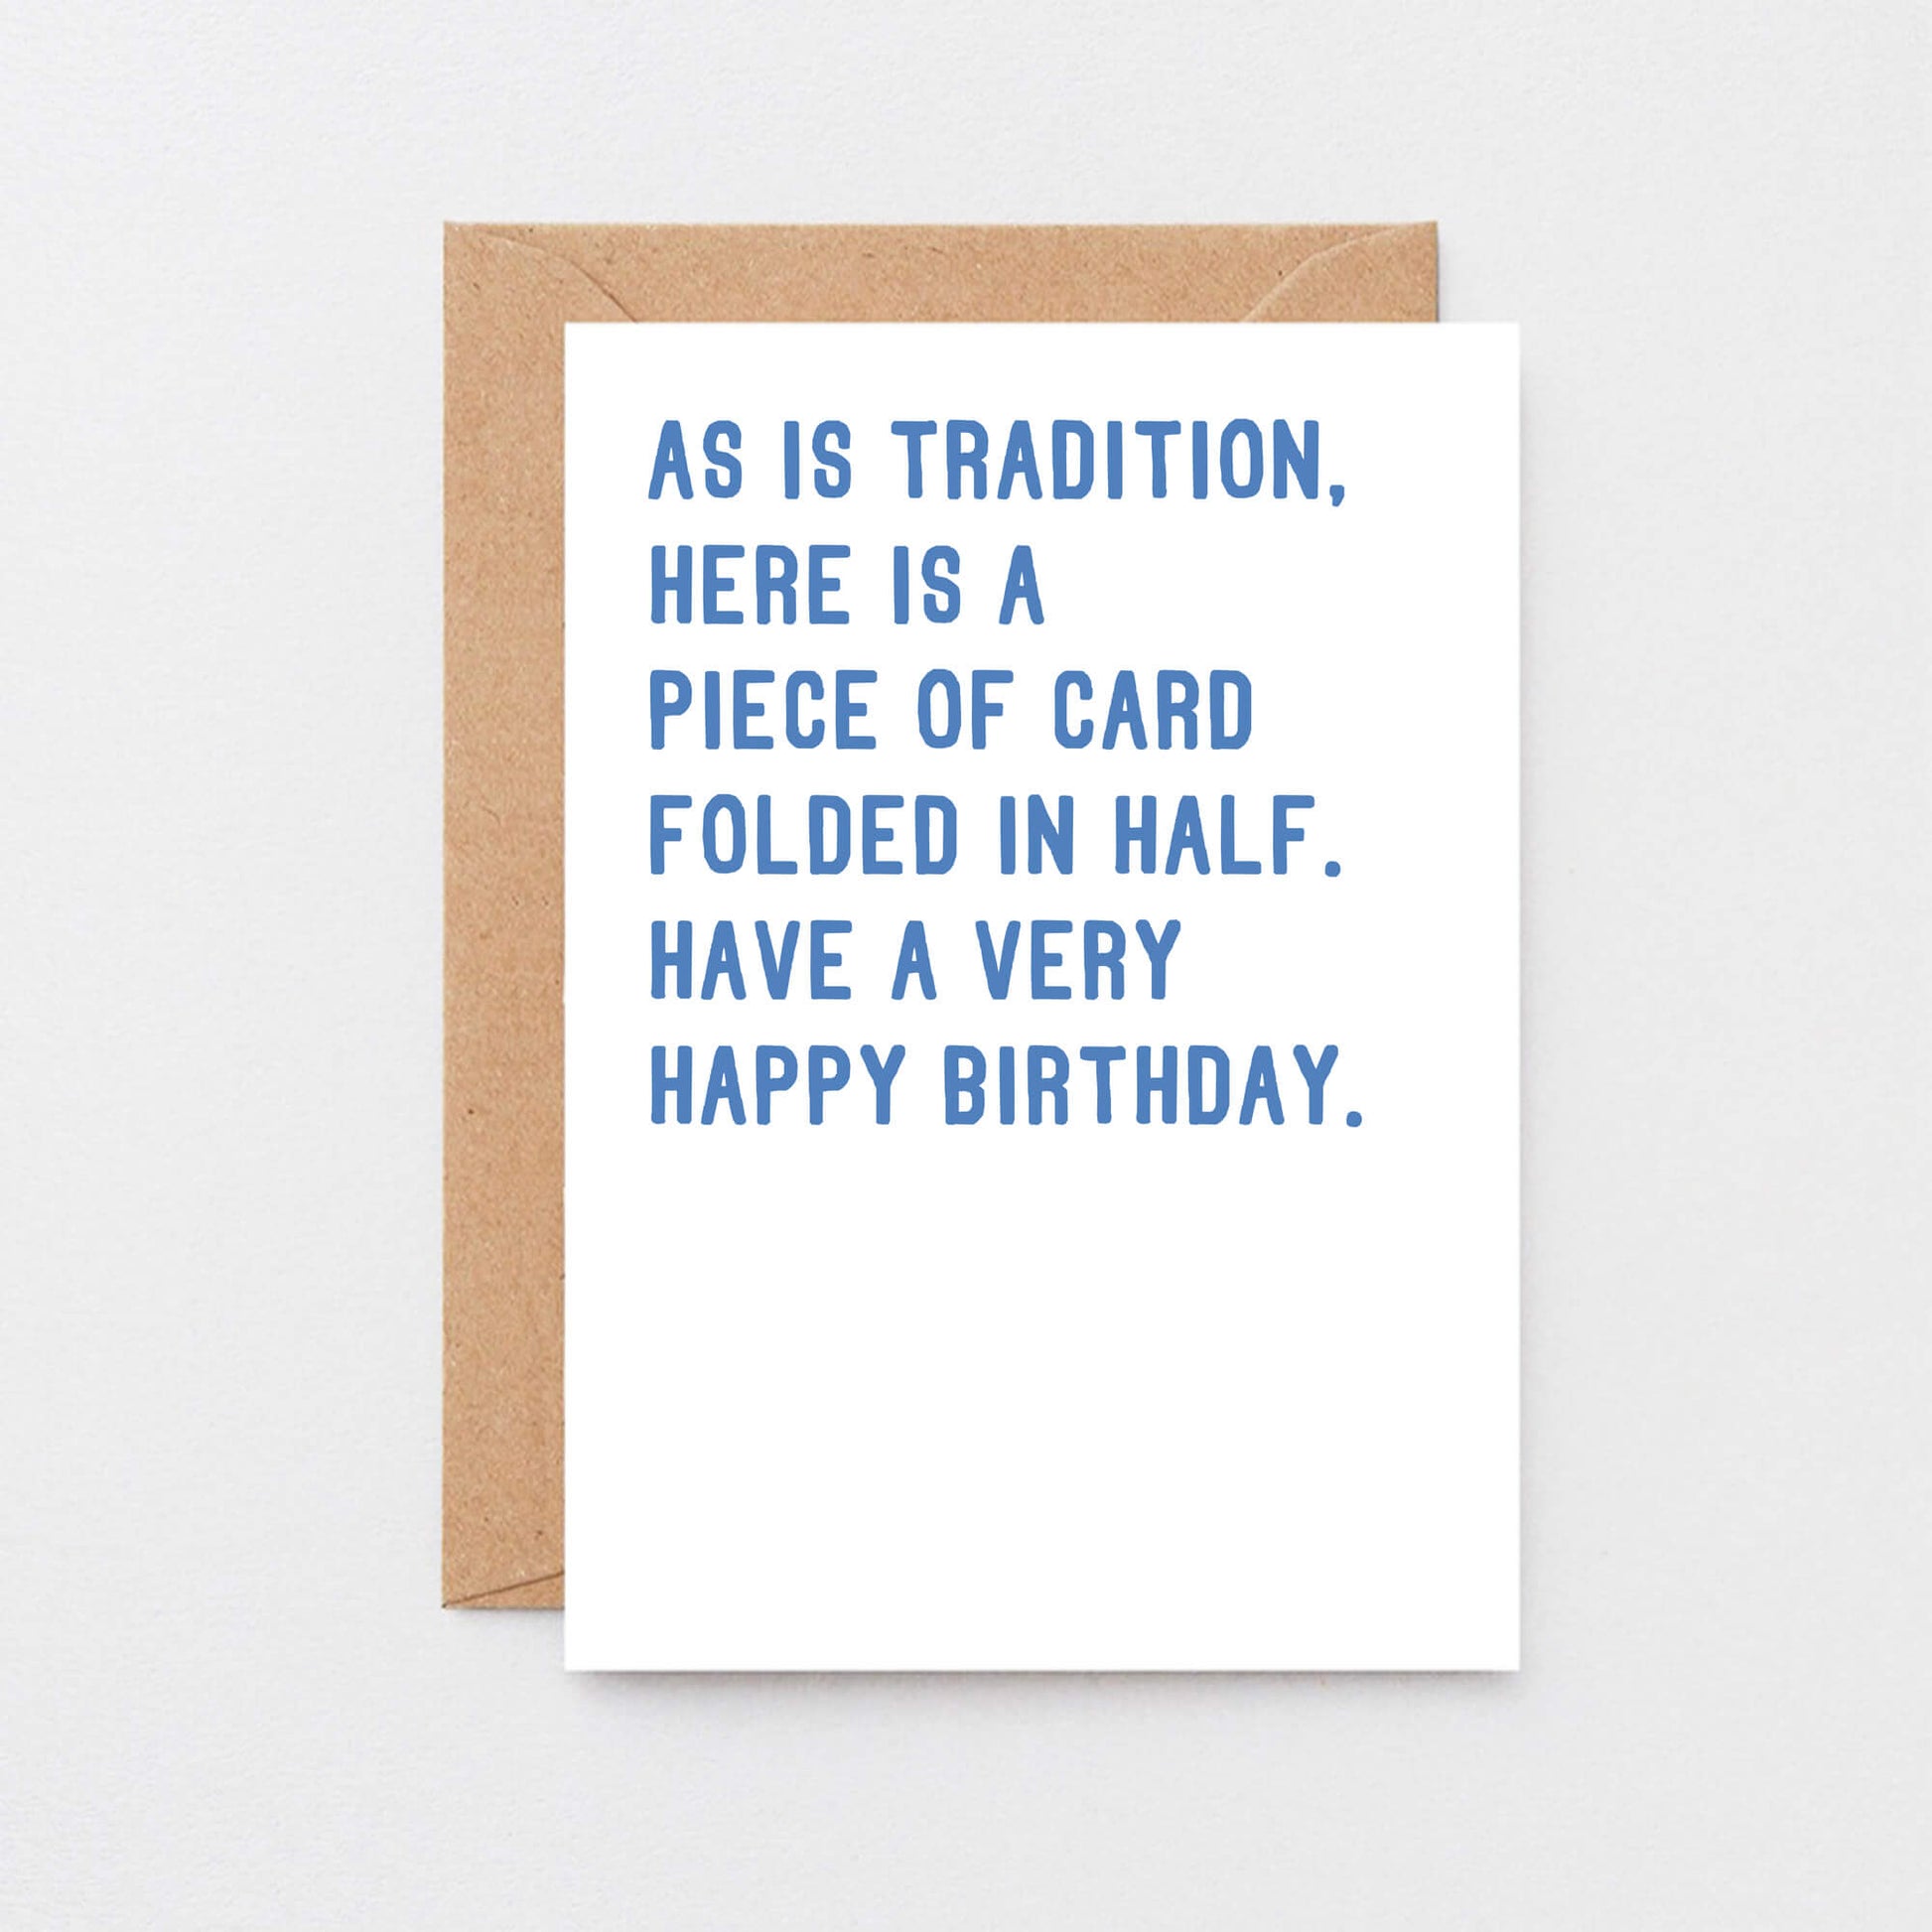 Birthday Card by SixElevenCreations. Reads As is tradition, here is a piece of card folded in half. Have a very happy birthday. Product Code SE2005A6